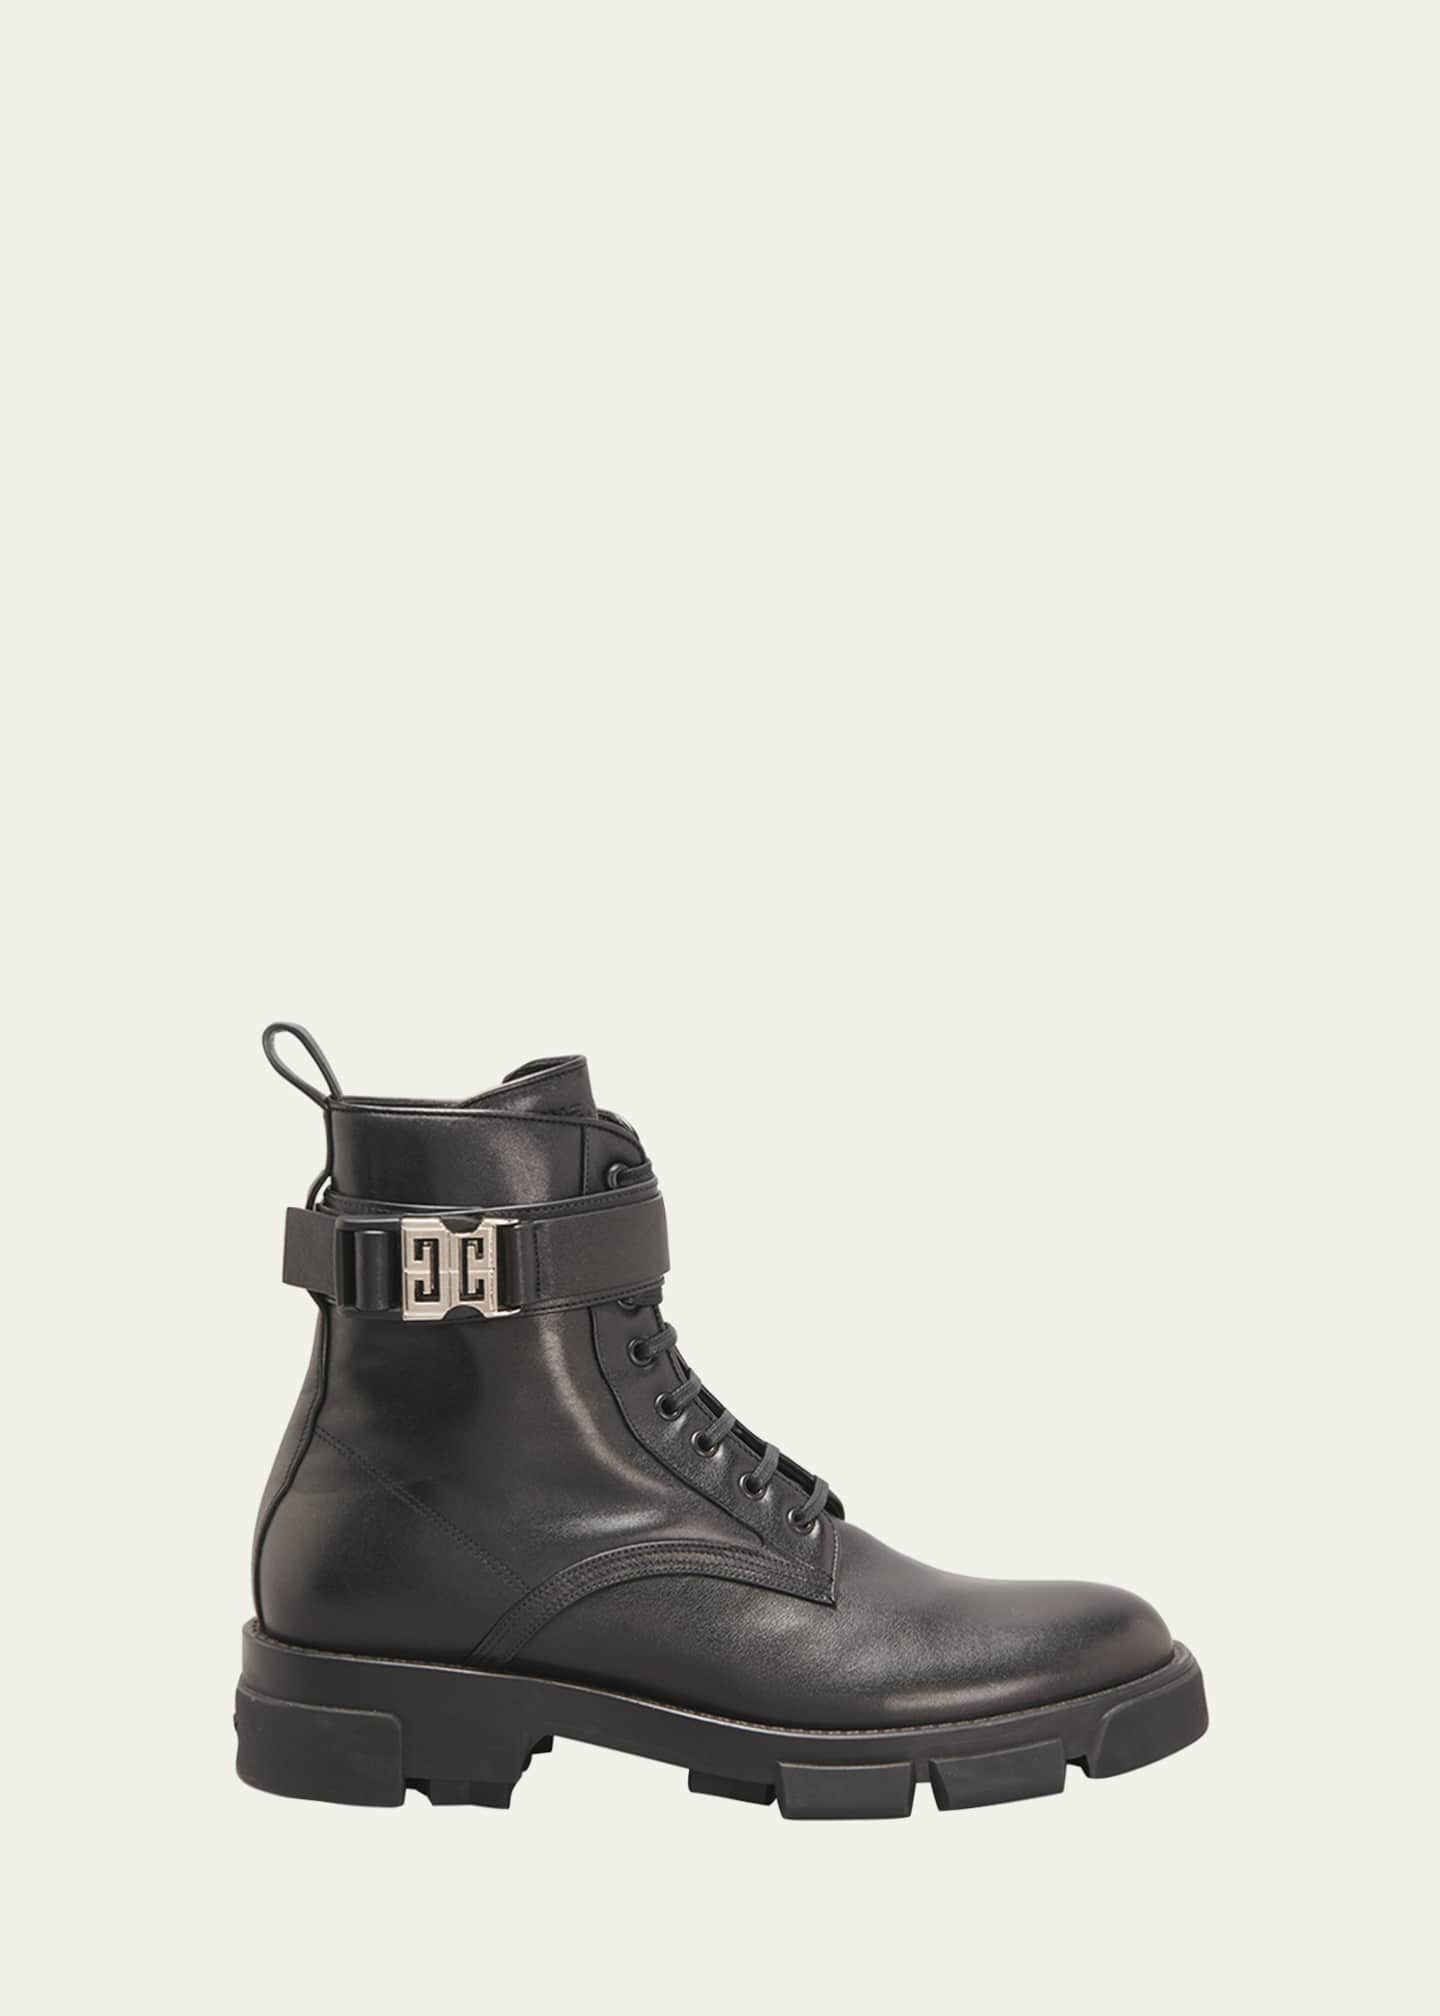 Givenchy Men's Terra Leather Lace-Up Combat Boots